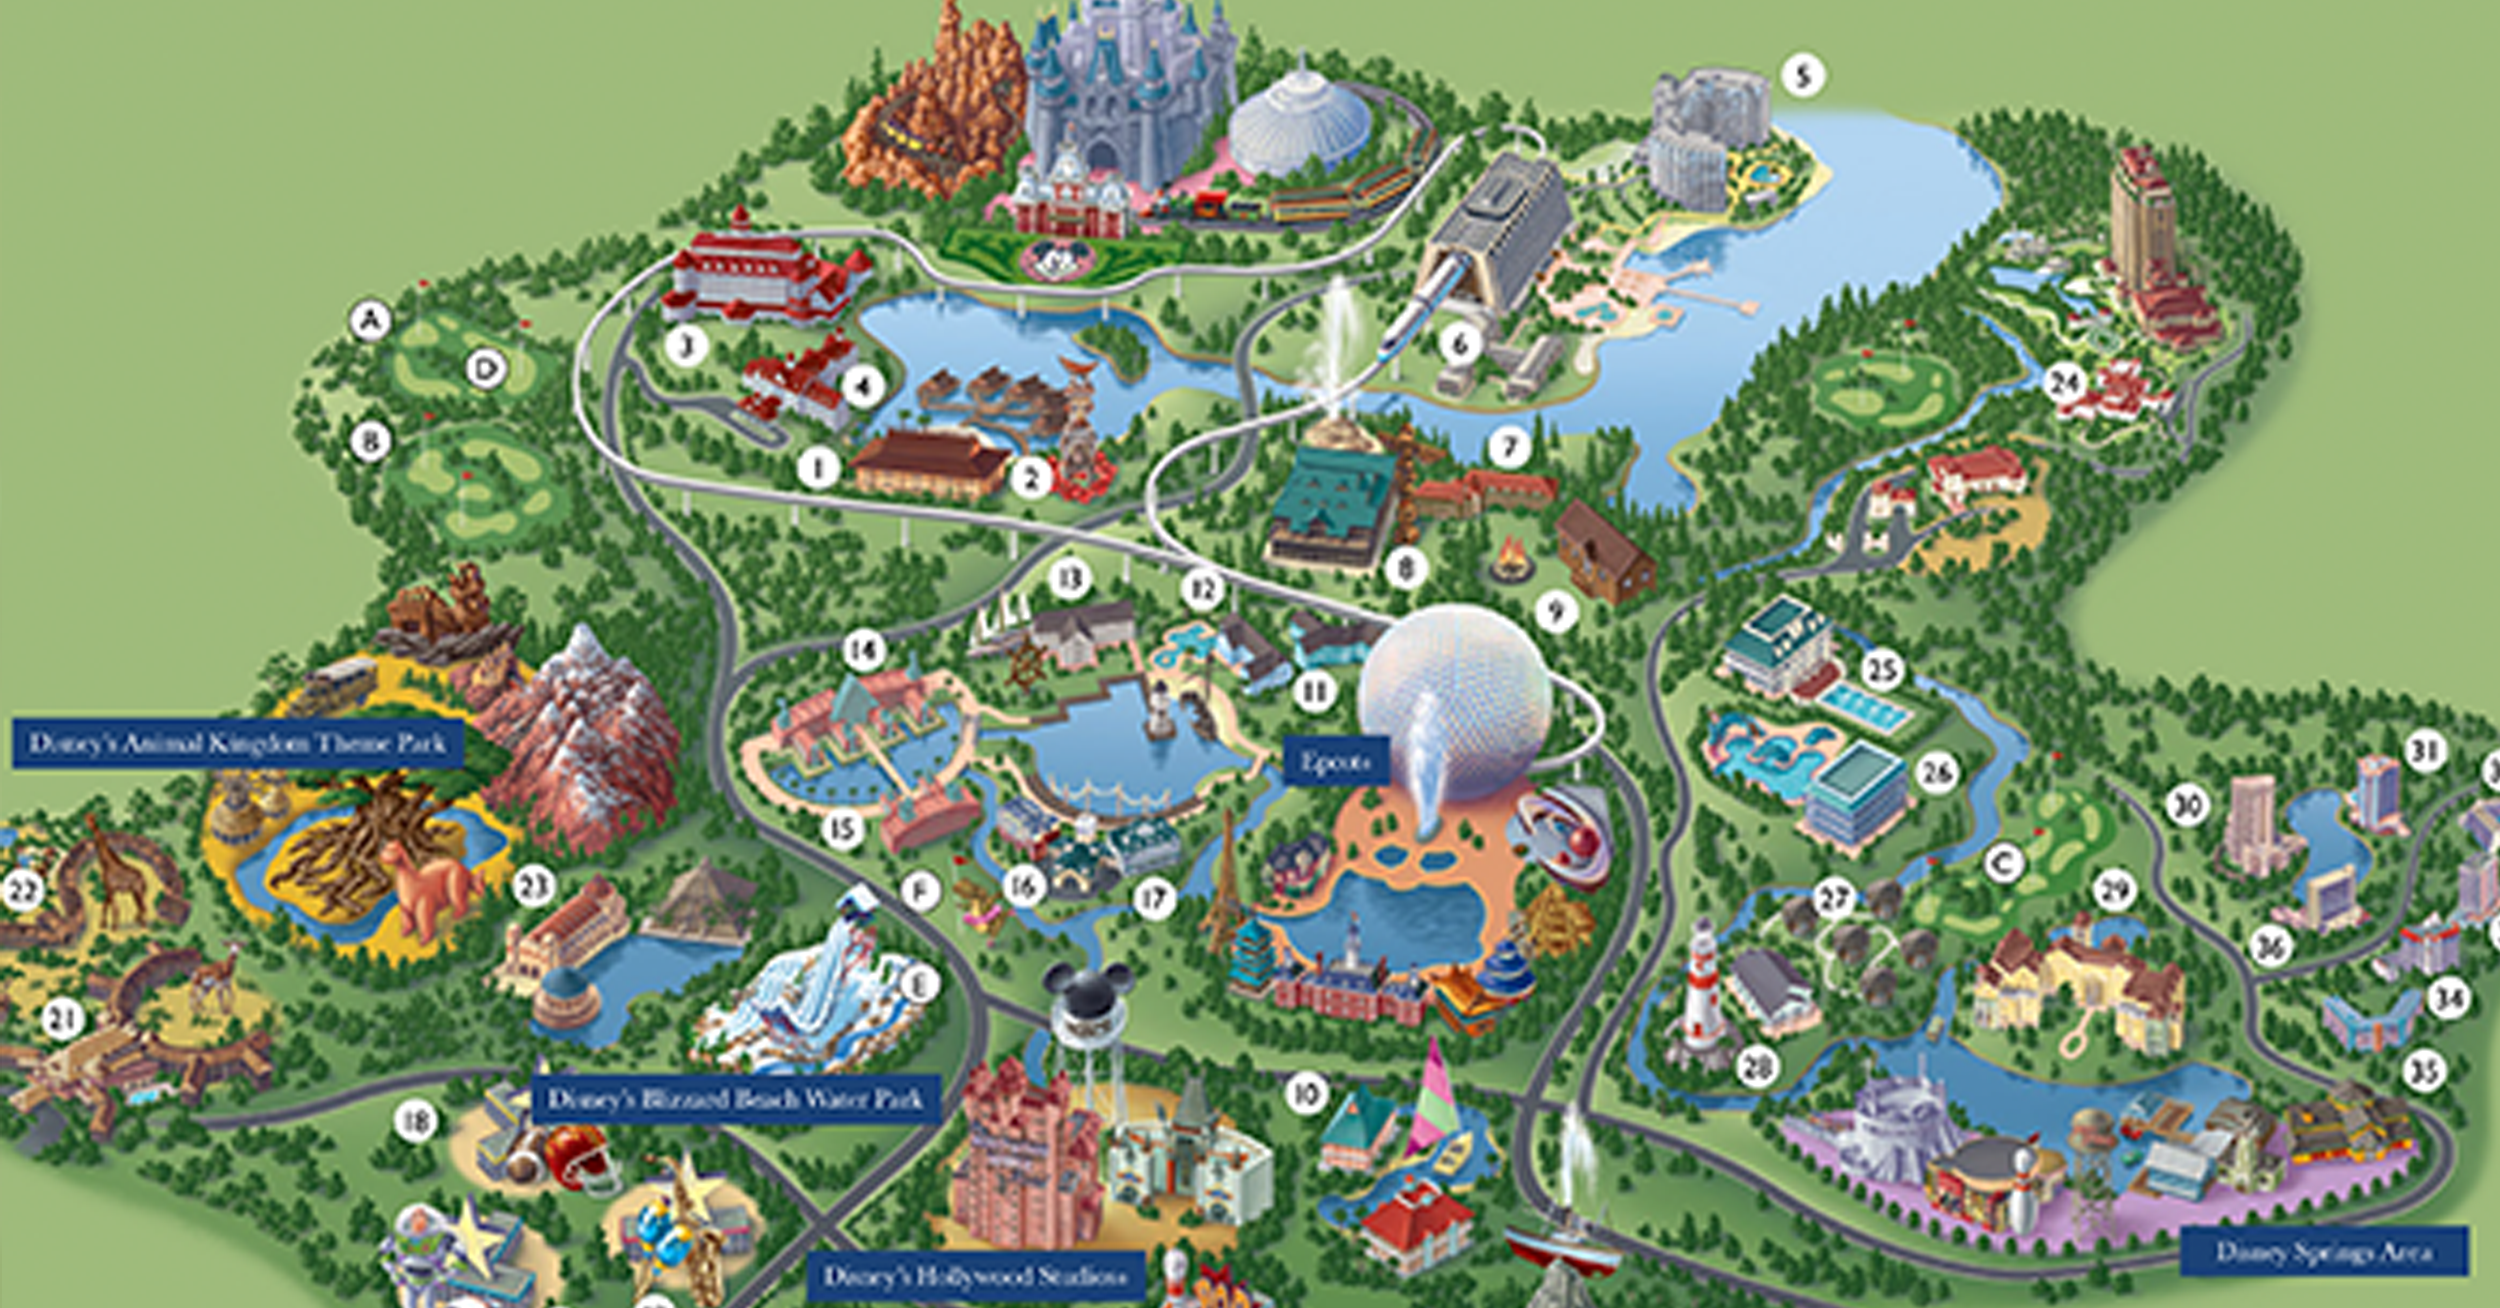 Overview map of Disney World resort (not to scale)